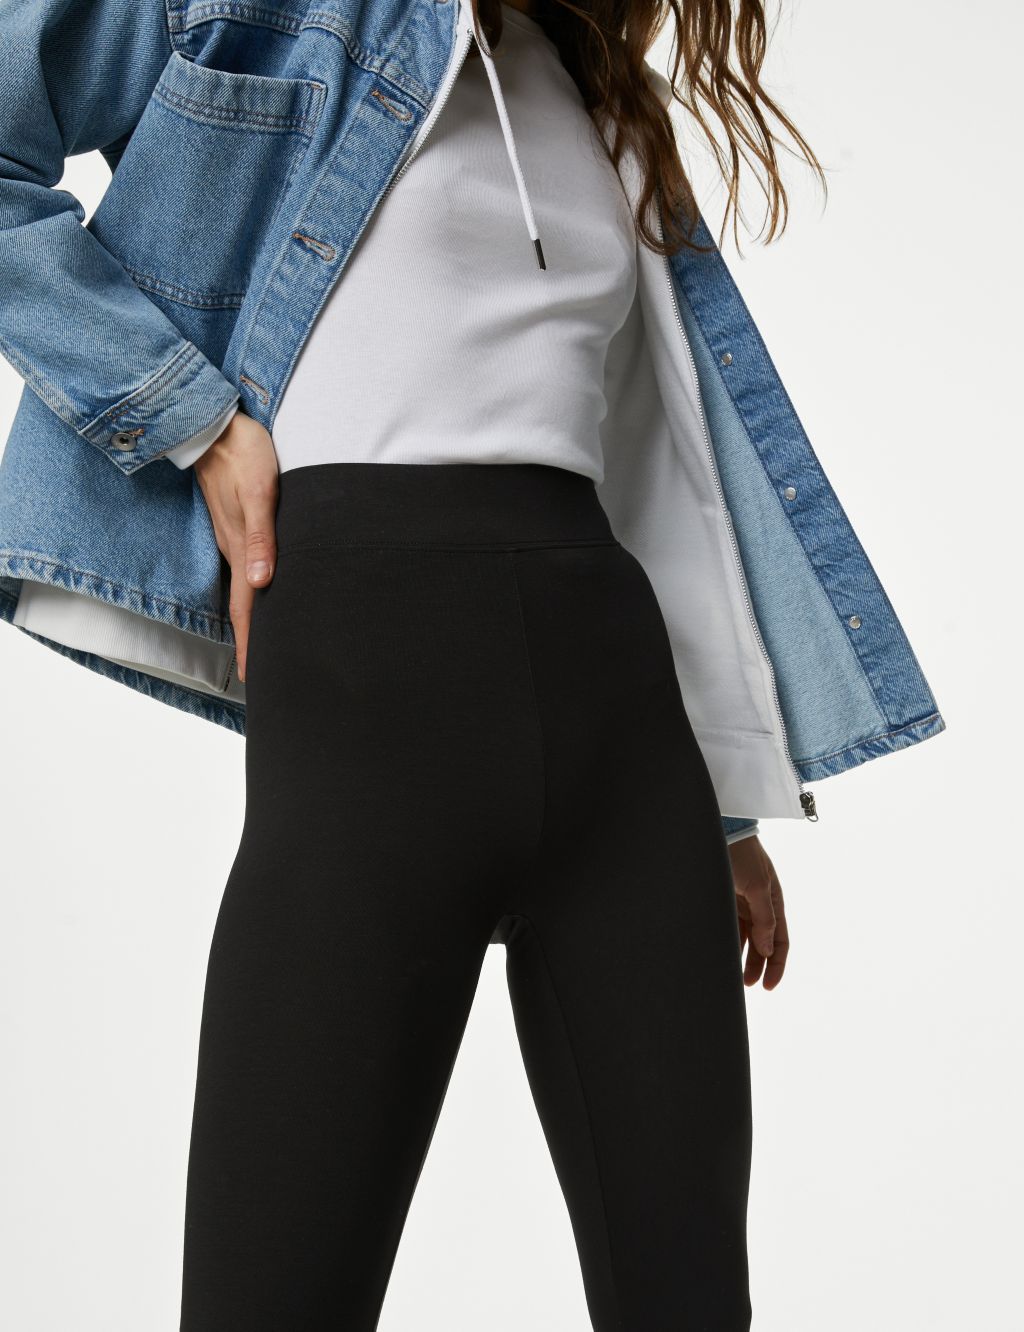 M&S shoppers praise £22.50 leggings which 'cover the tummy area' - Belfast  Live